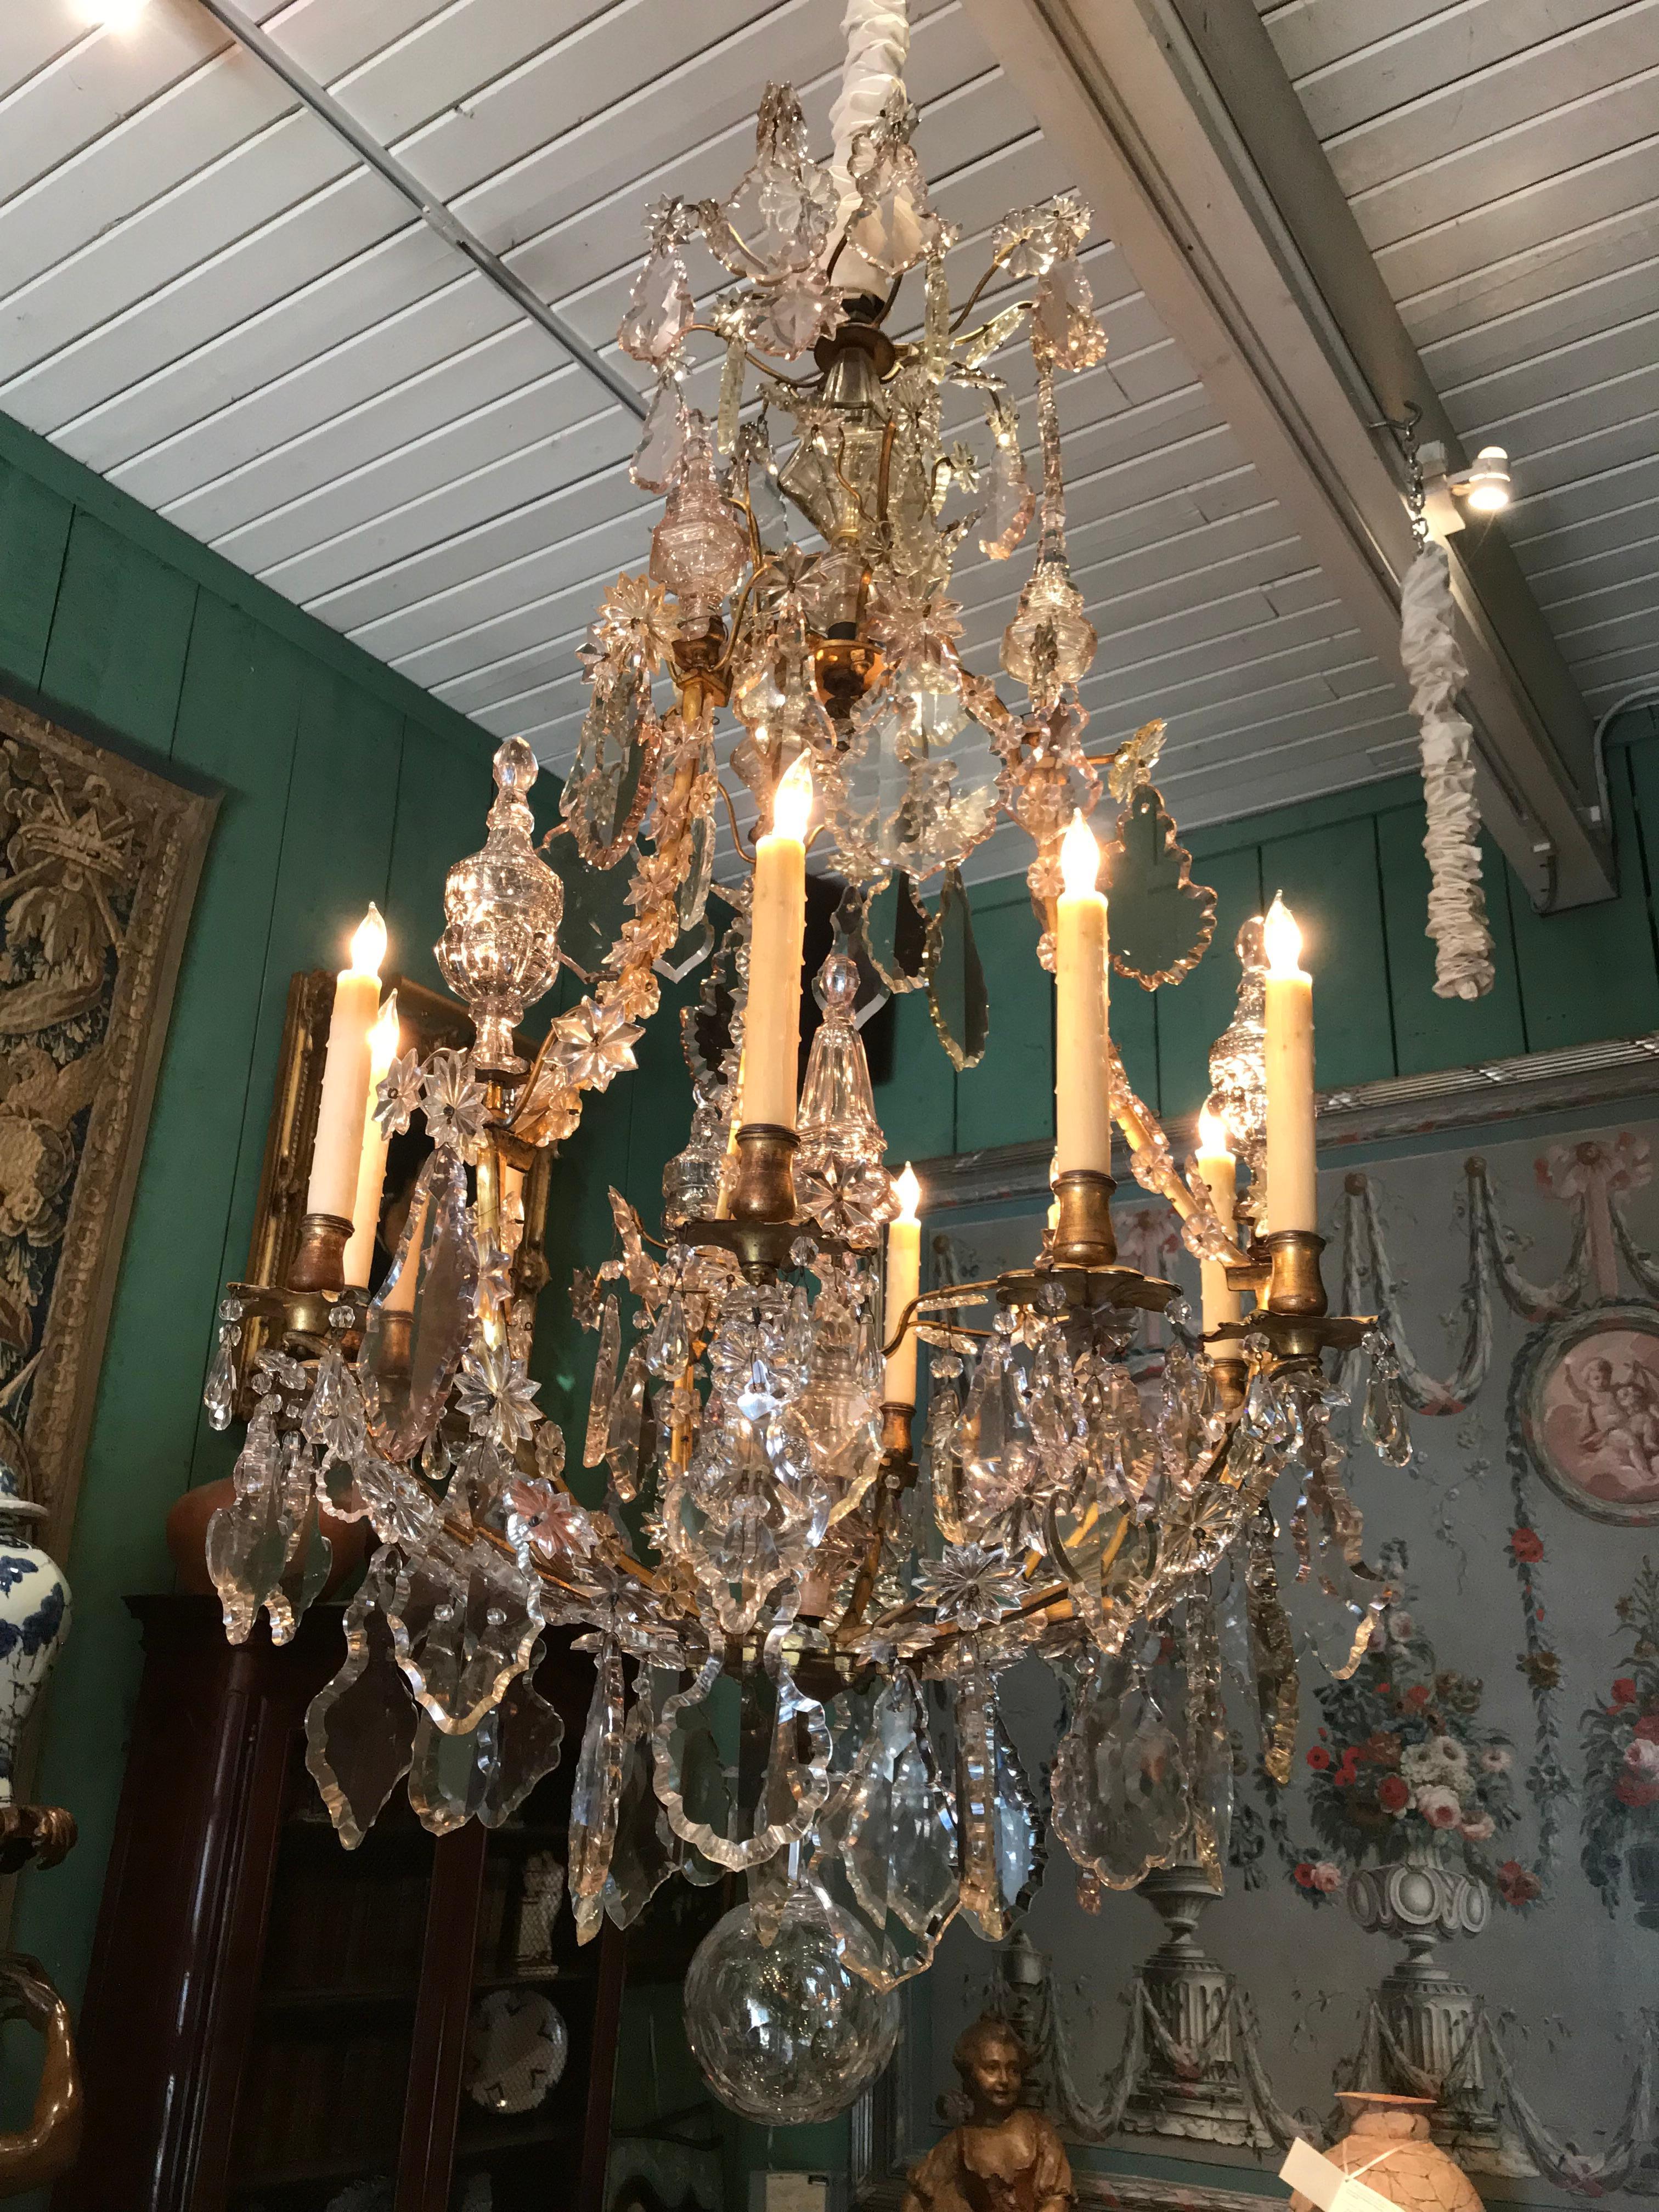 Large Baccarat Crystal Antique Chandelier Dining ceiling 12 light fixture pendant . Late 18th Early 19th century Rare and Exquisite baccarat crystal chandelier 12 light with hand made crafted Elegant Bronze cage . French luxury manufacturer of fine